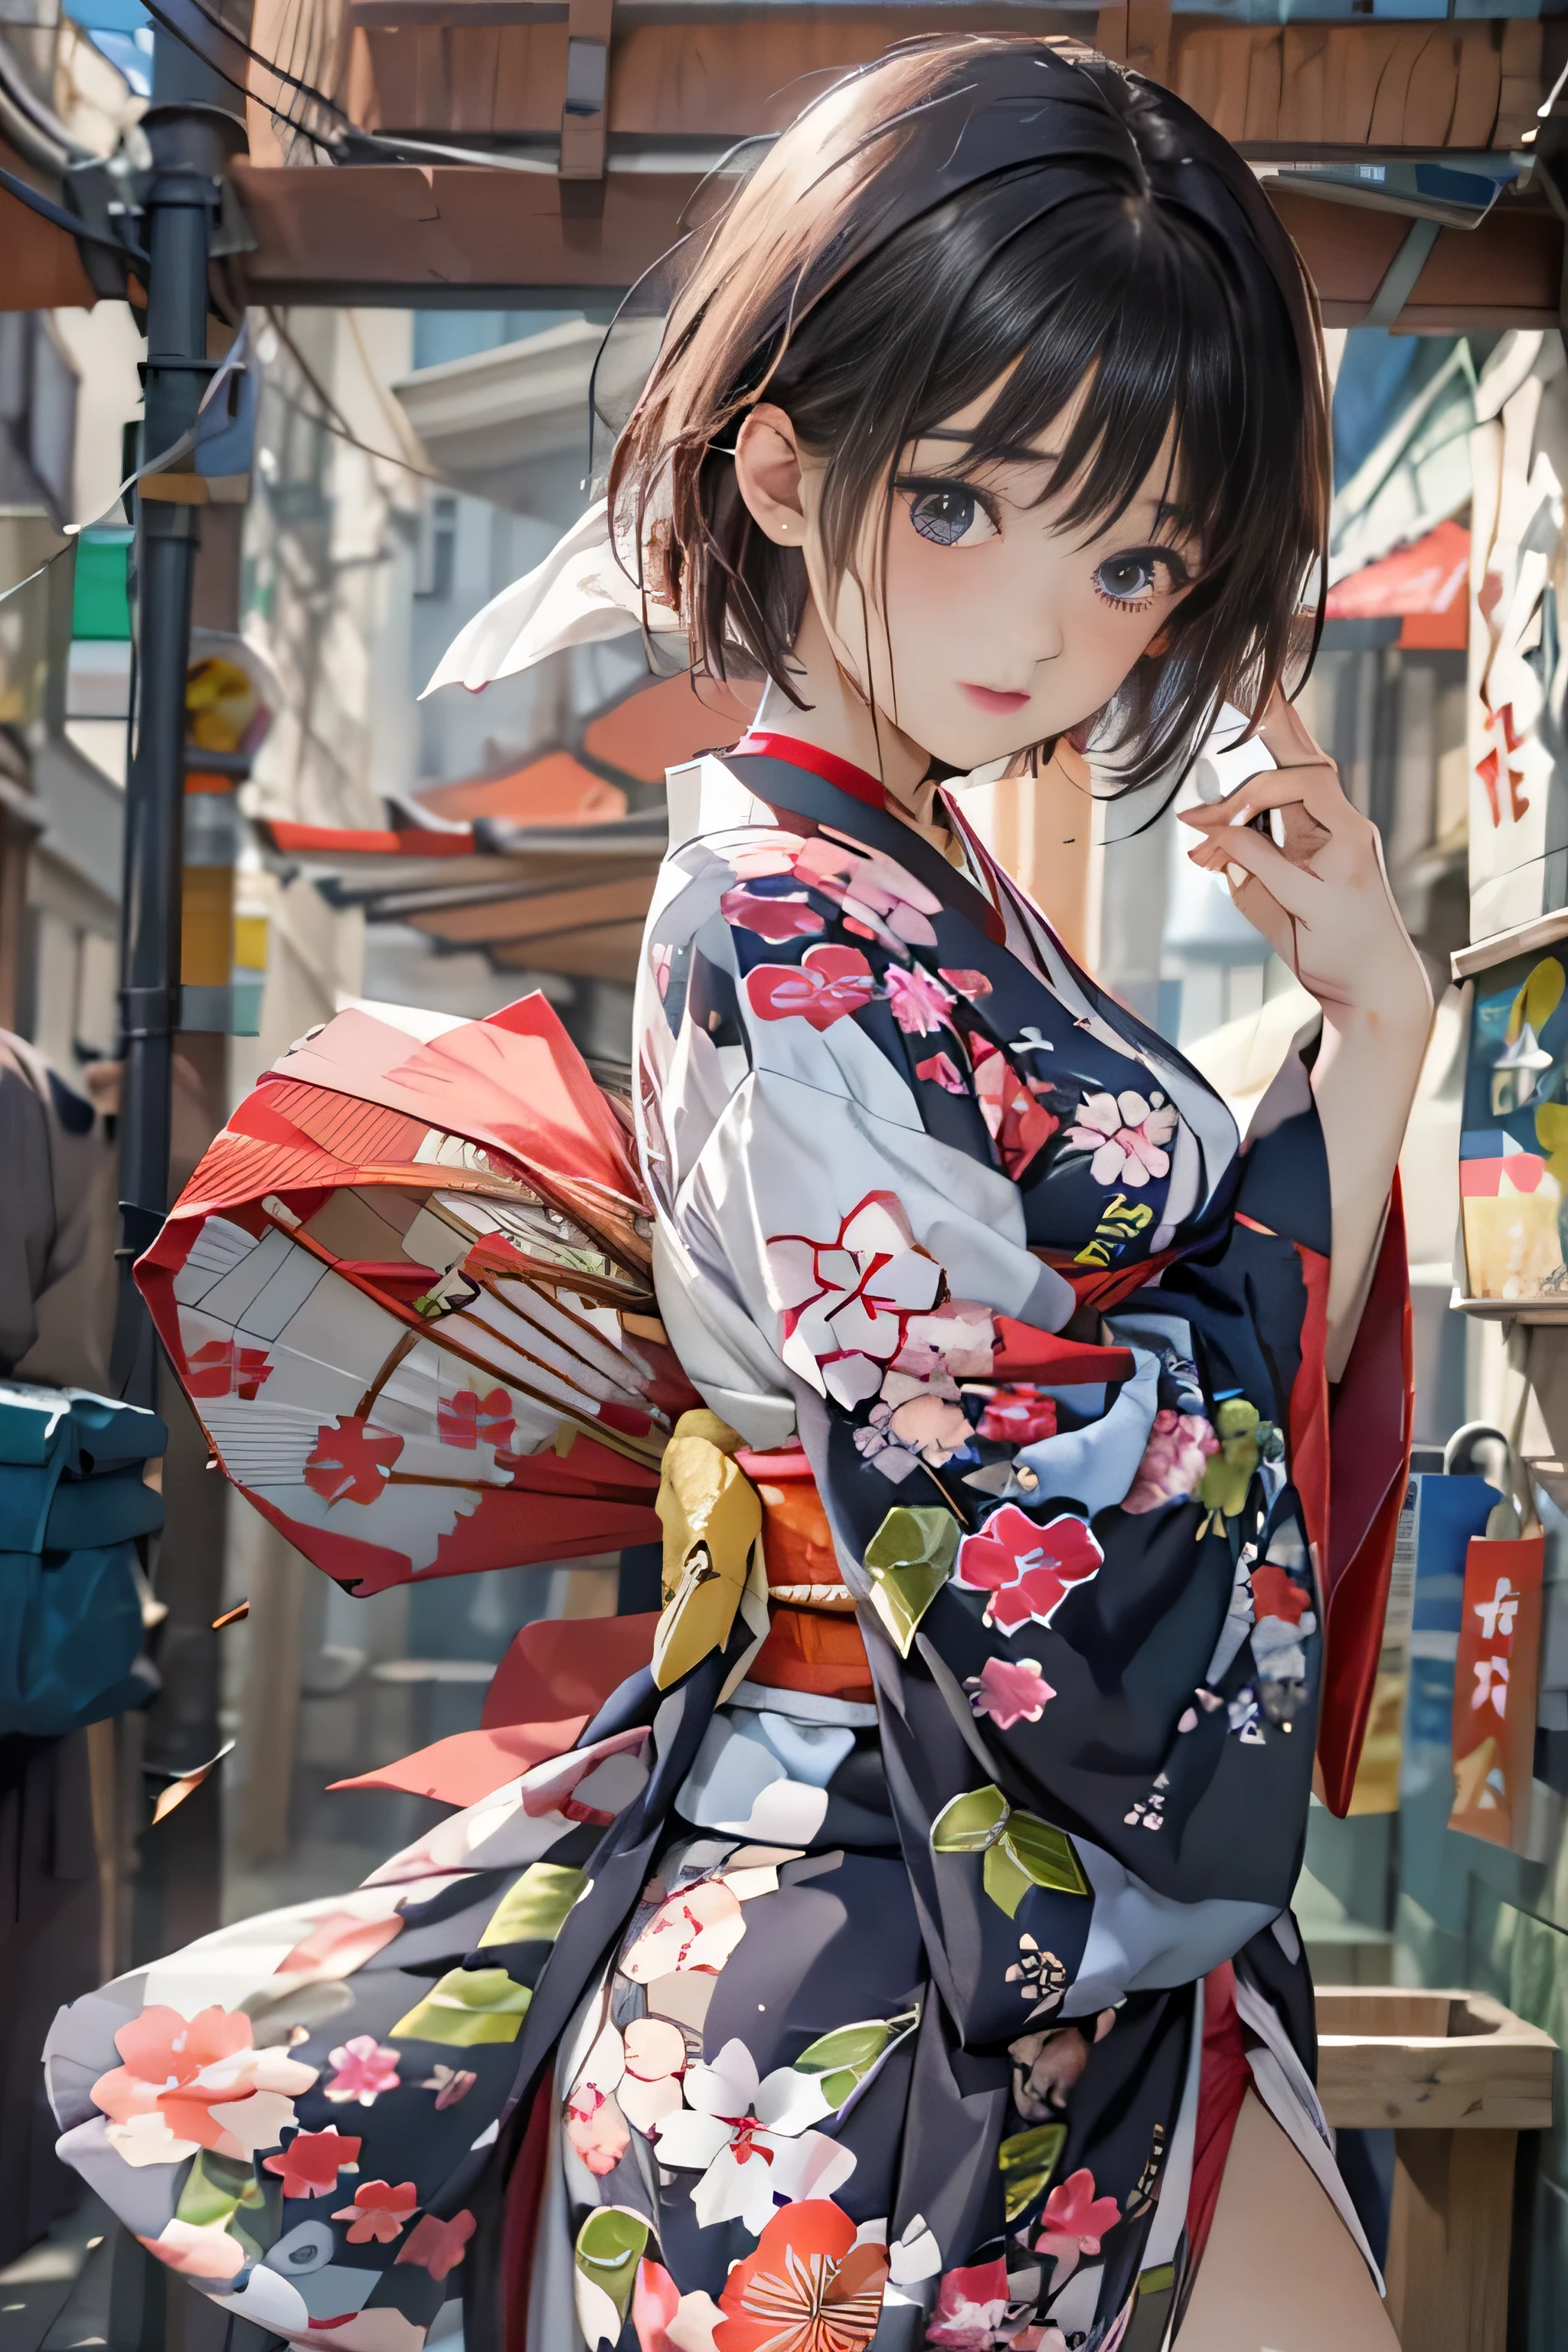 (top-quality,8K picture quality,​masterpiece:1.3,hight resolution,masutepiece:1.2), Front view:0.8,full body Esbian:1.2, 23-year-old woman, Looking at the camera,(Japanese dress, Kimono:1.4,Komono:1.2, a choker:1.4),(Shorthair:1.2,well-groomed black hair), (Back alley:1.3), Kimono comes off,thigh visible,I can see panties,Beautiful face,Cinematic,(Young gravure idols, Young skinny gravure idol, sophisticated gravure idol),(detailed flawless face),normal hands:1.5,Normal finger:1:5,Normal legs:1.5